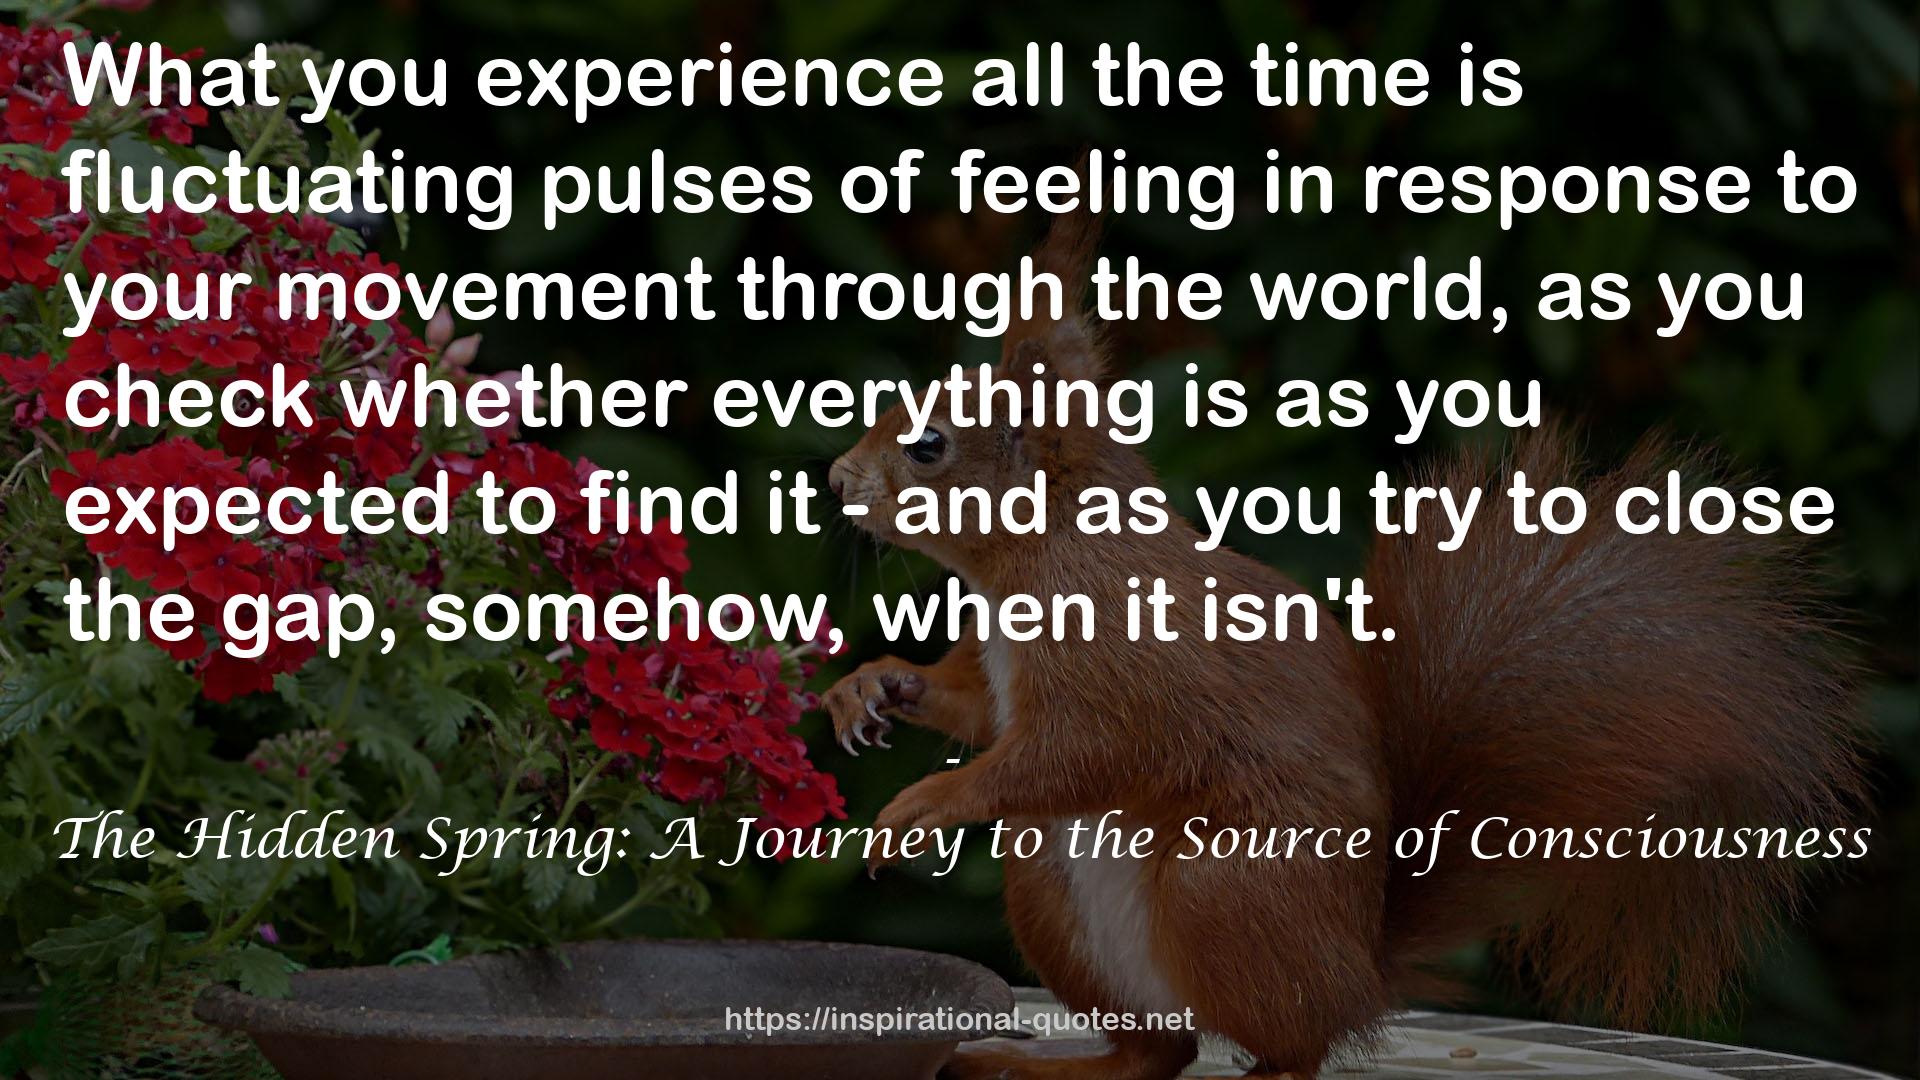 The Hidden Spring: A Journey to the Source of Consciousness QUOTES